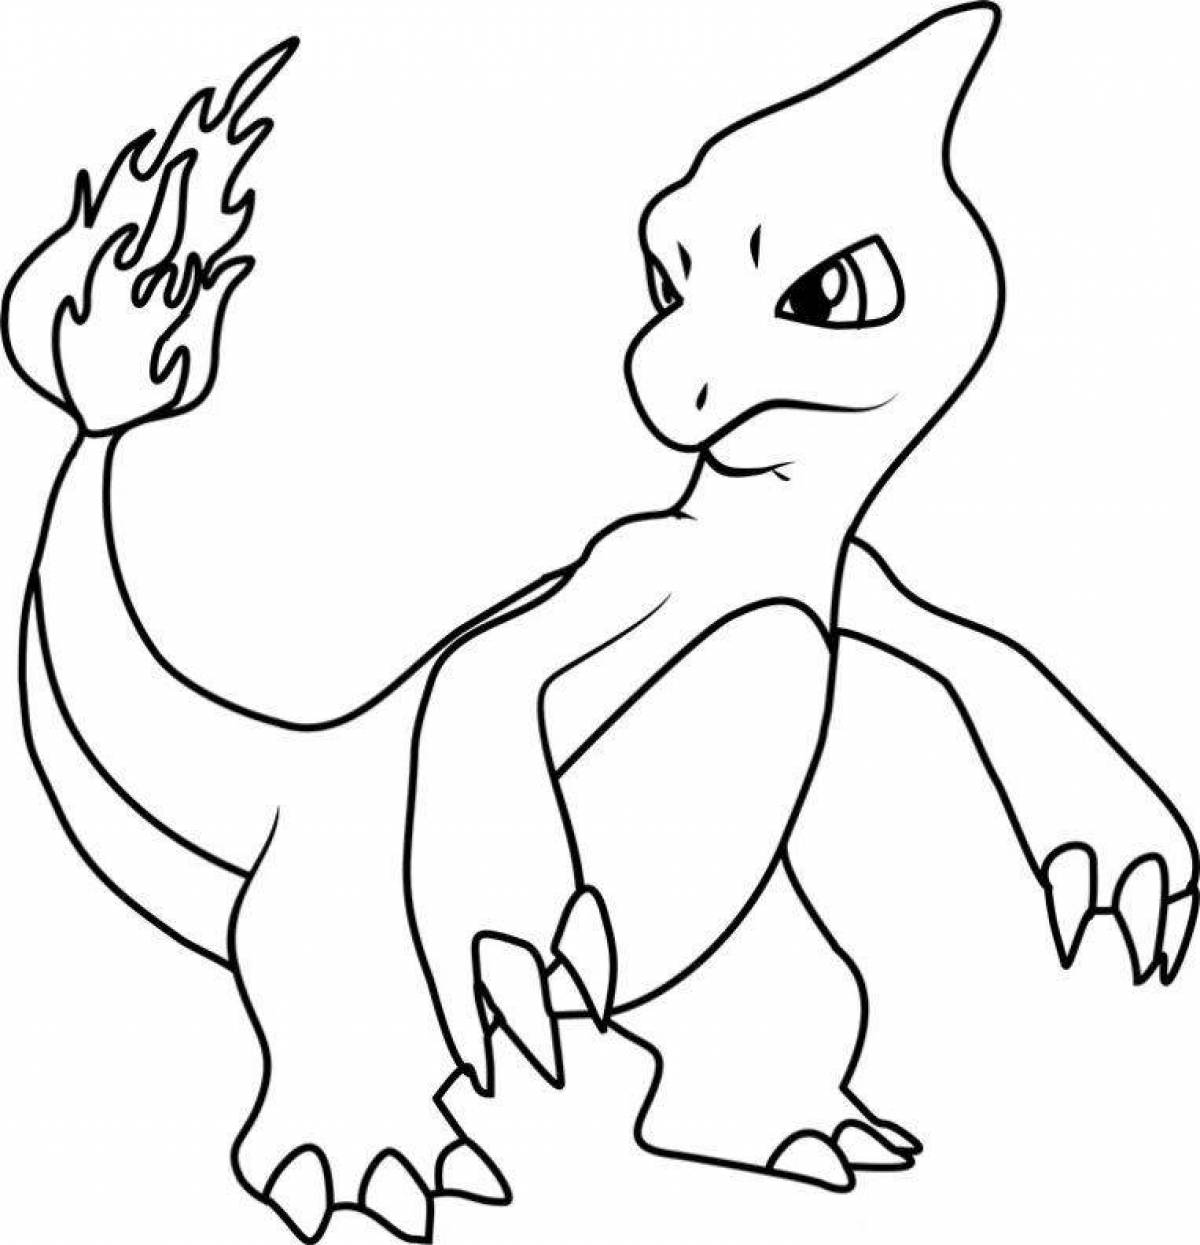 Gorgeous charmander coloring page